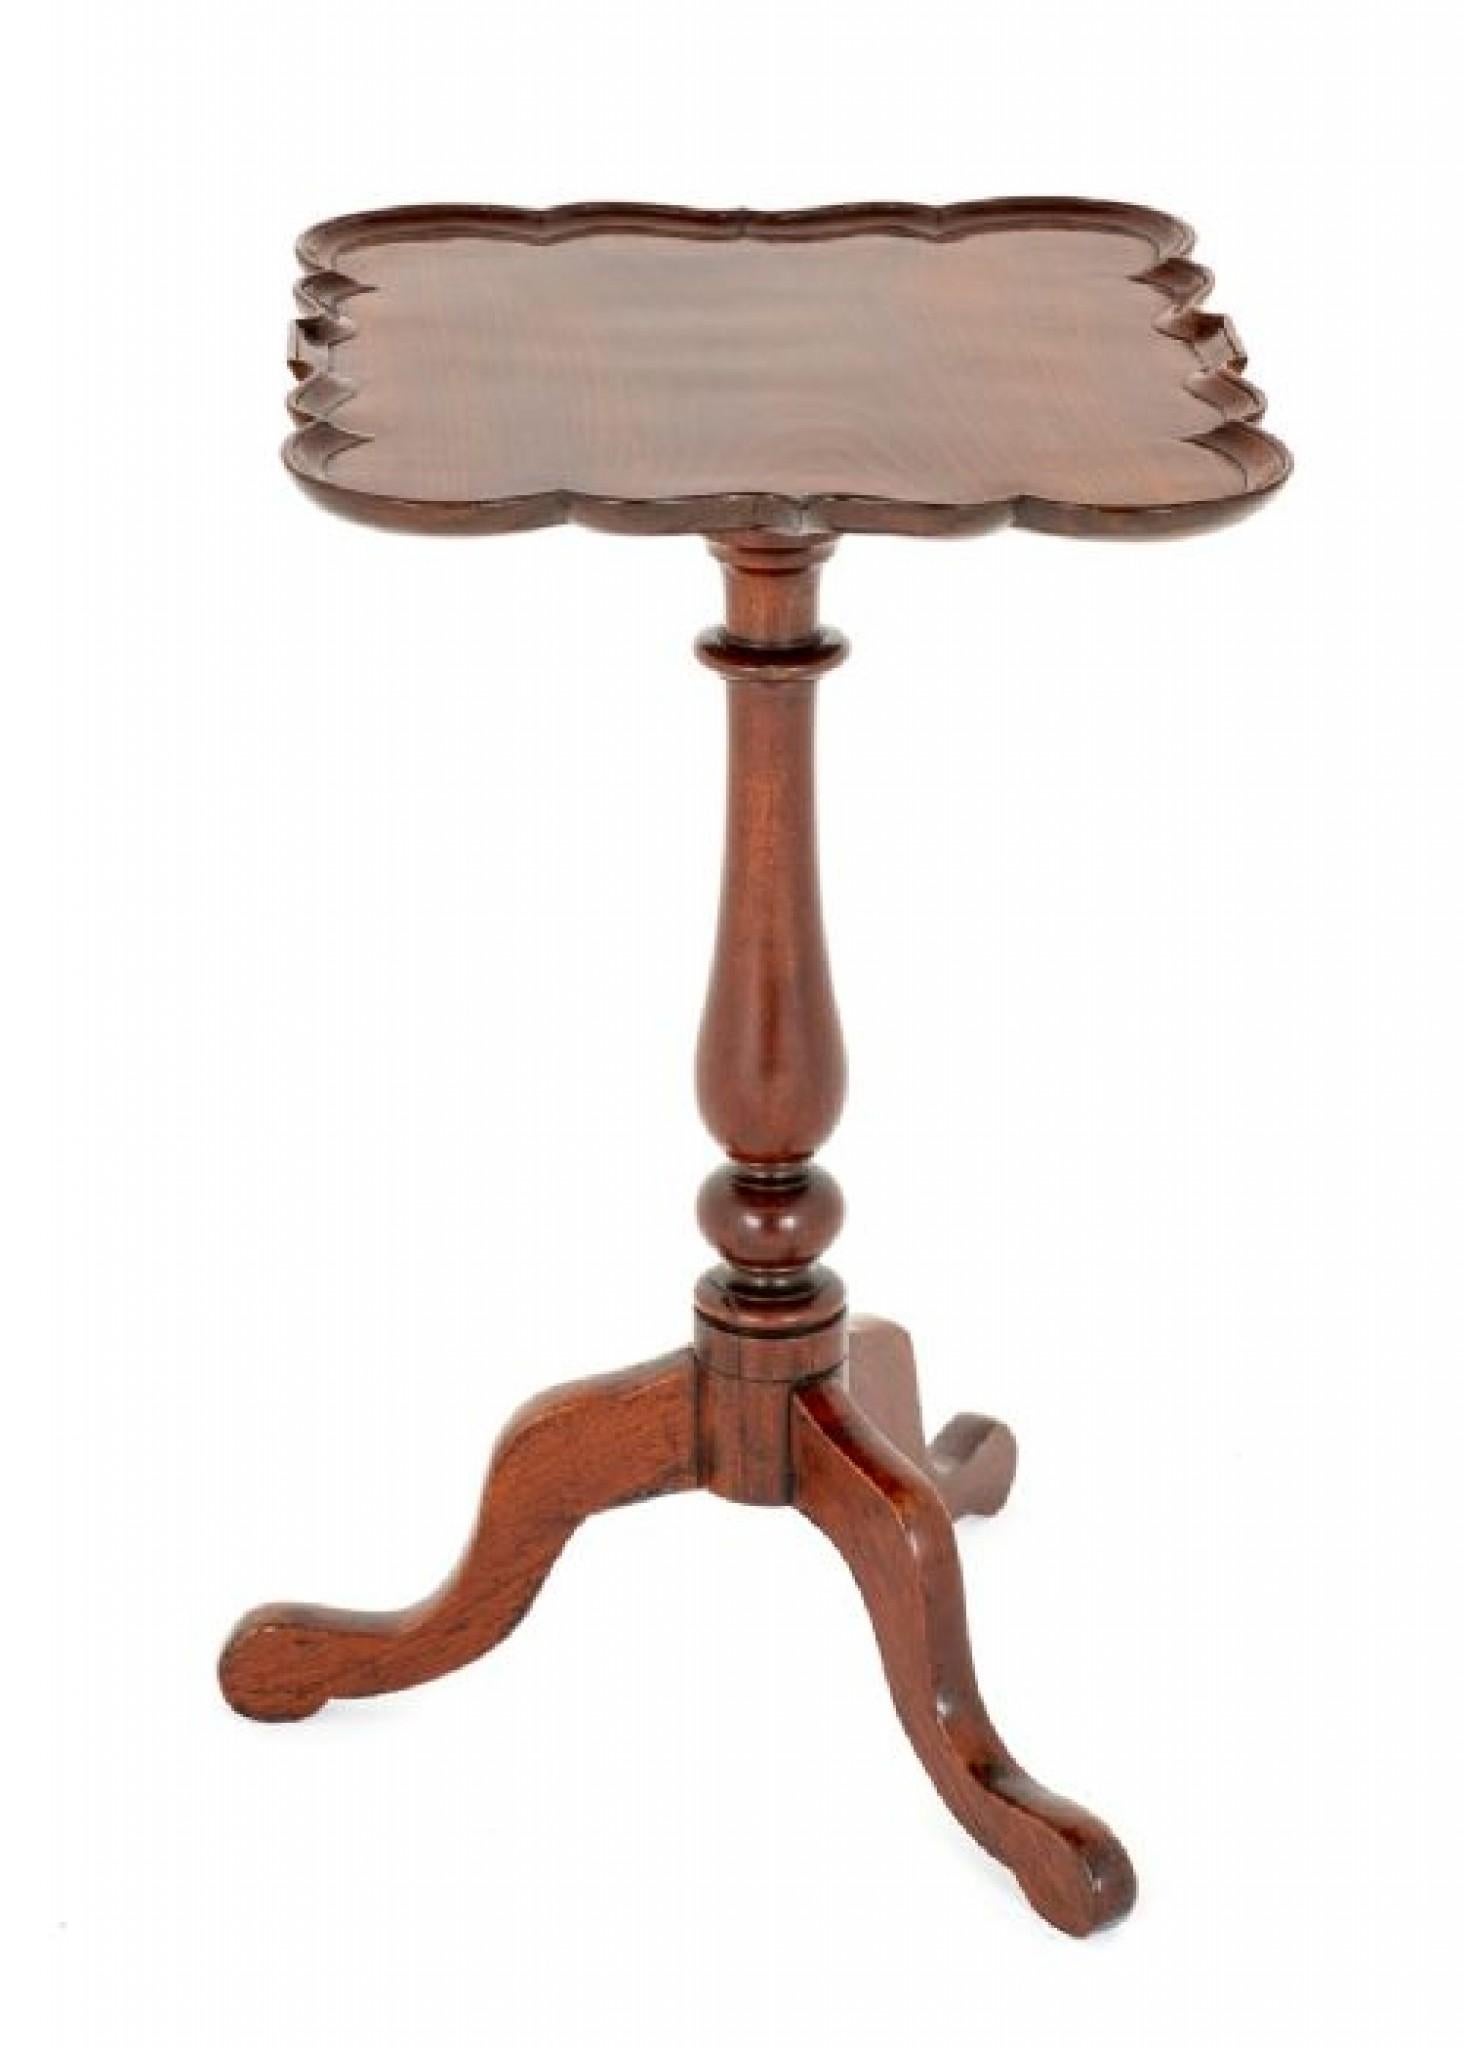 Pretty Victorian Mahogany Wine Table.
circa 1860
The Top of the Wine Table Features Flame Mahogany Timbers With Scalloped Moldings.
The Table Stands upon Shaped Legs with a Ring Turned Column.
Presented in good condition.